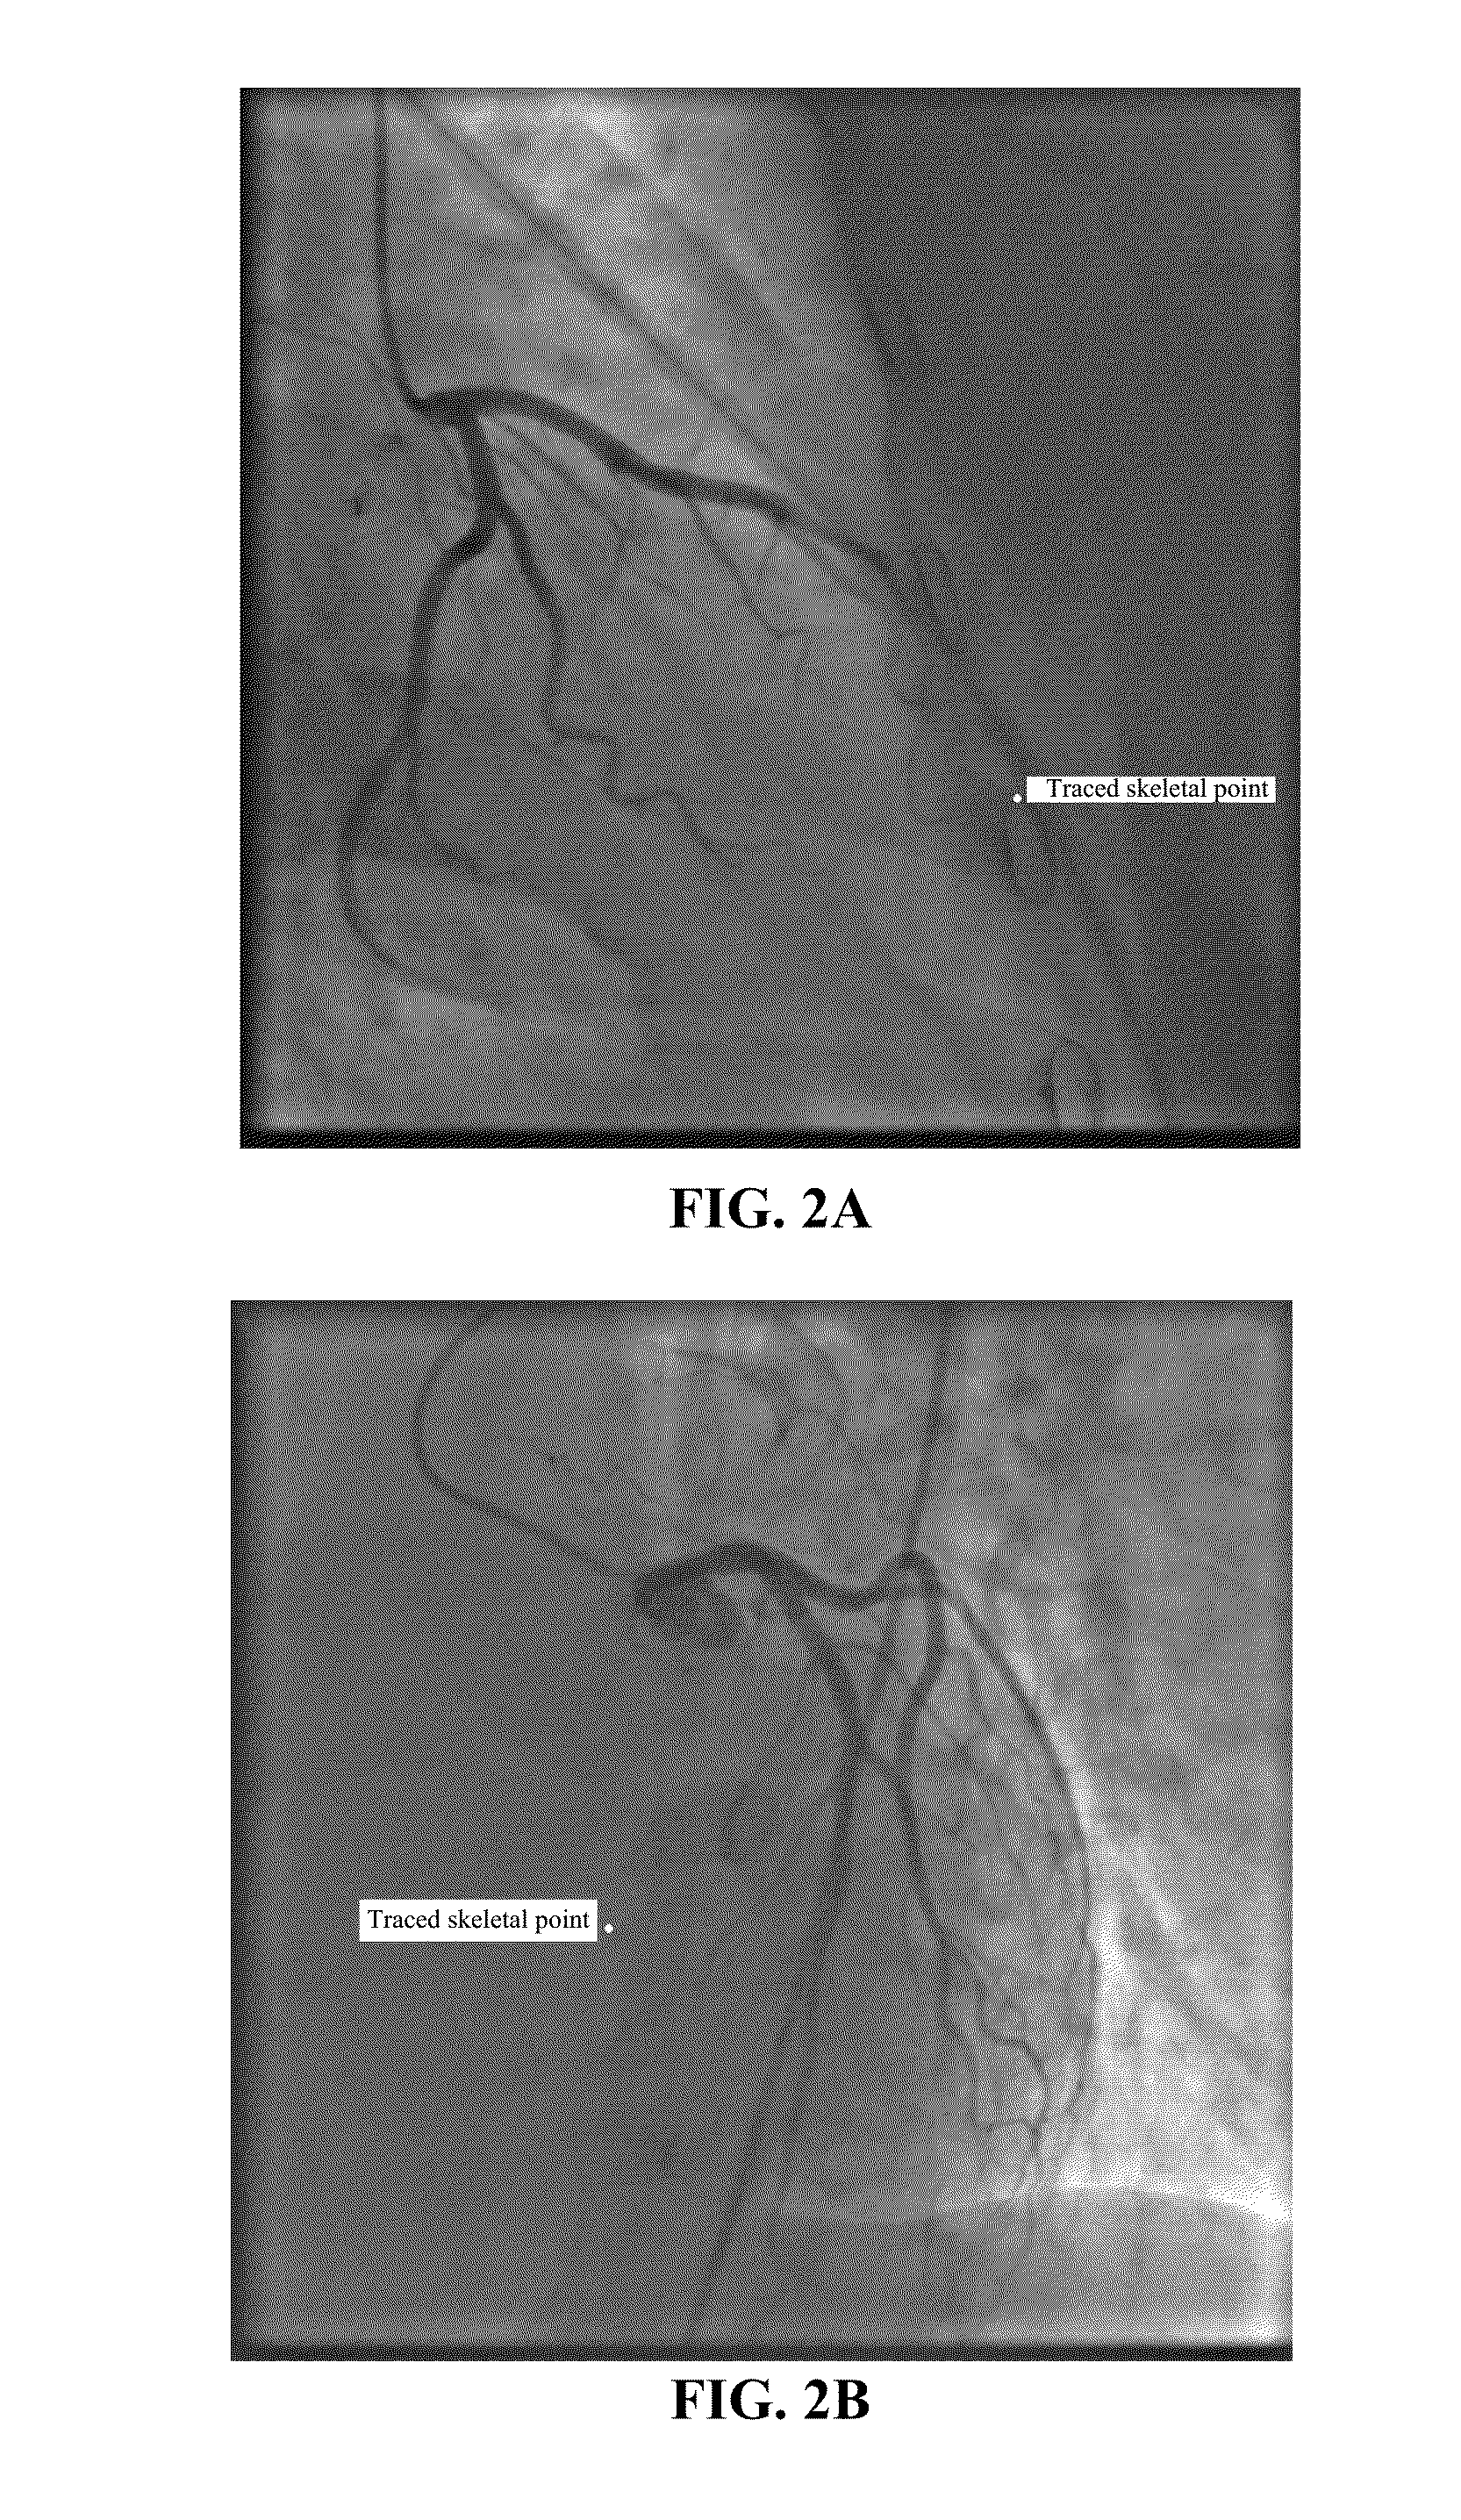 Method for separating and estimating multiple motion parameters in x-ray angiogram image